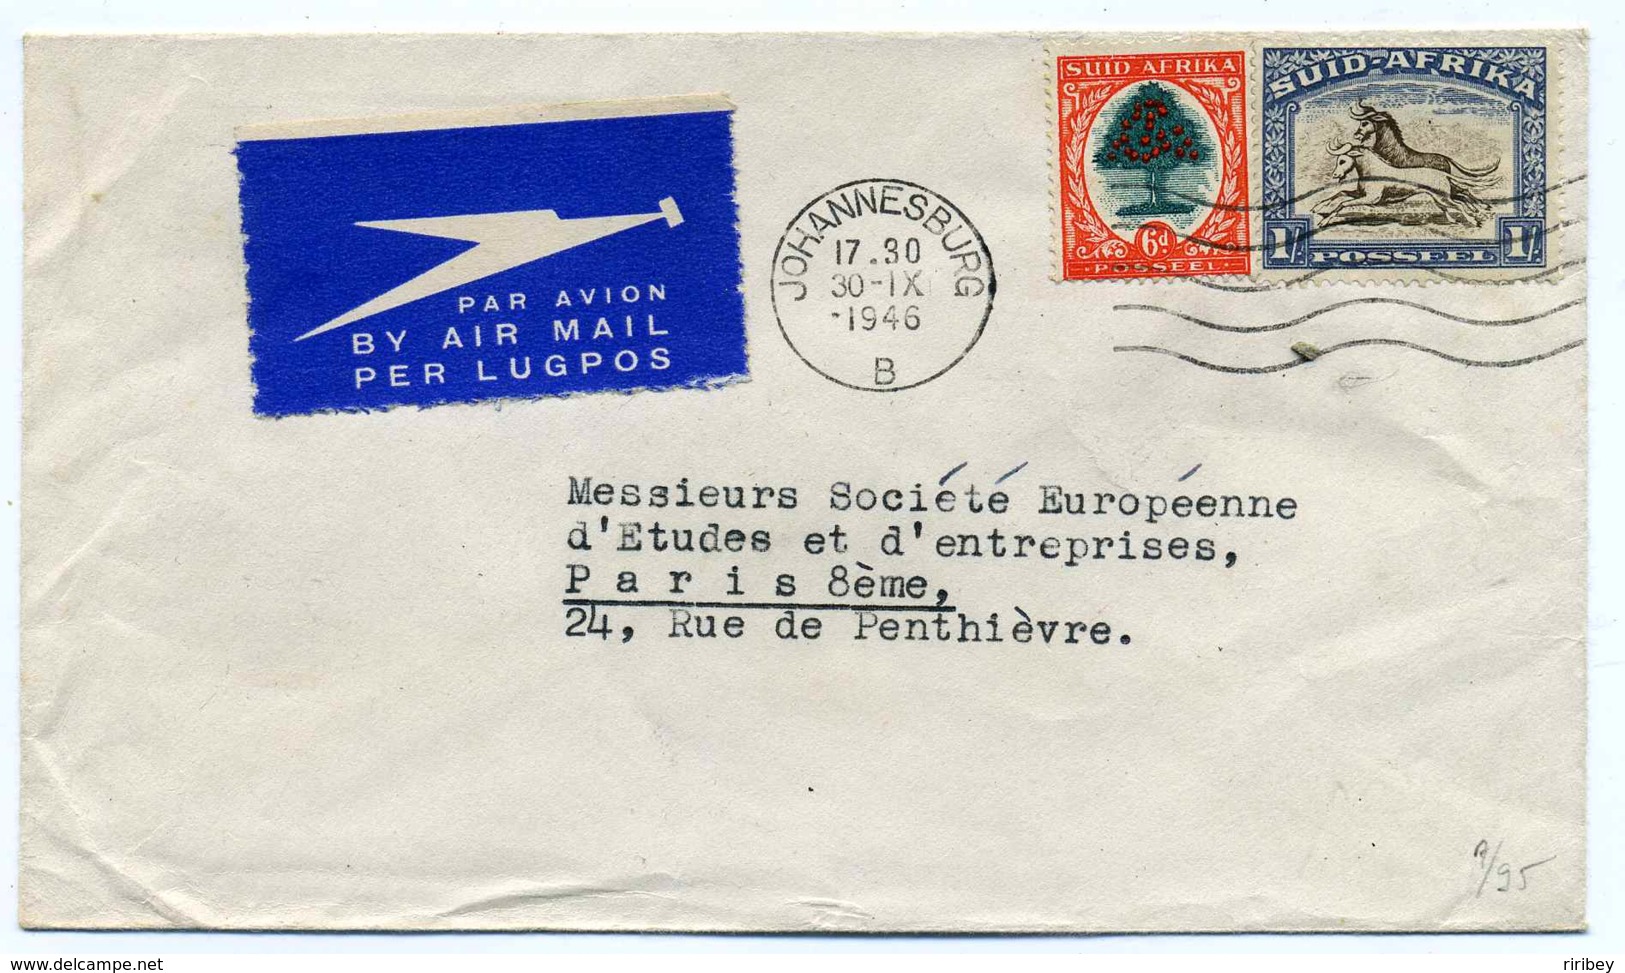 AIR MAIL COVER / JOHANNESBURG - SUID AFRICA / 1946 / To France - Posta Aerea